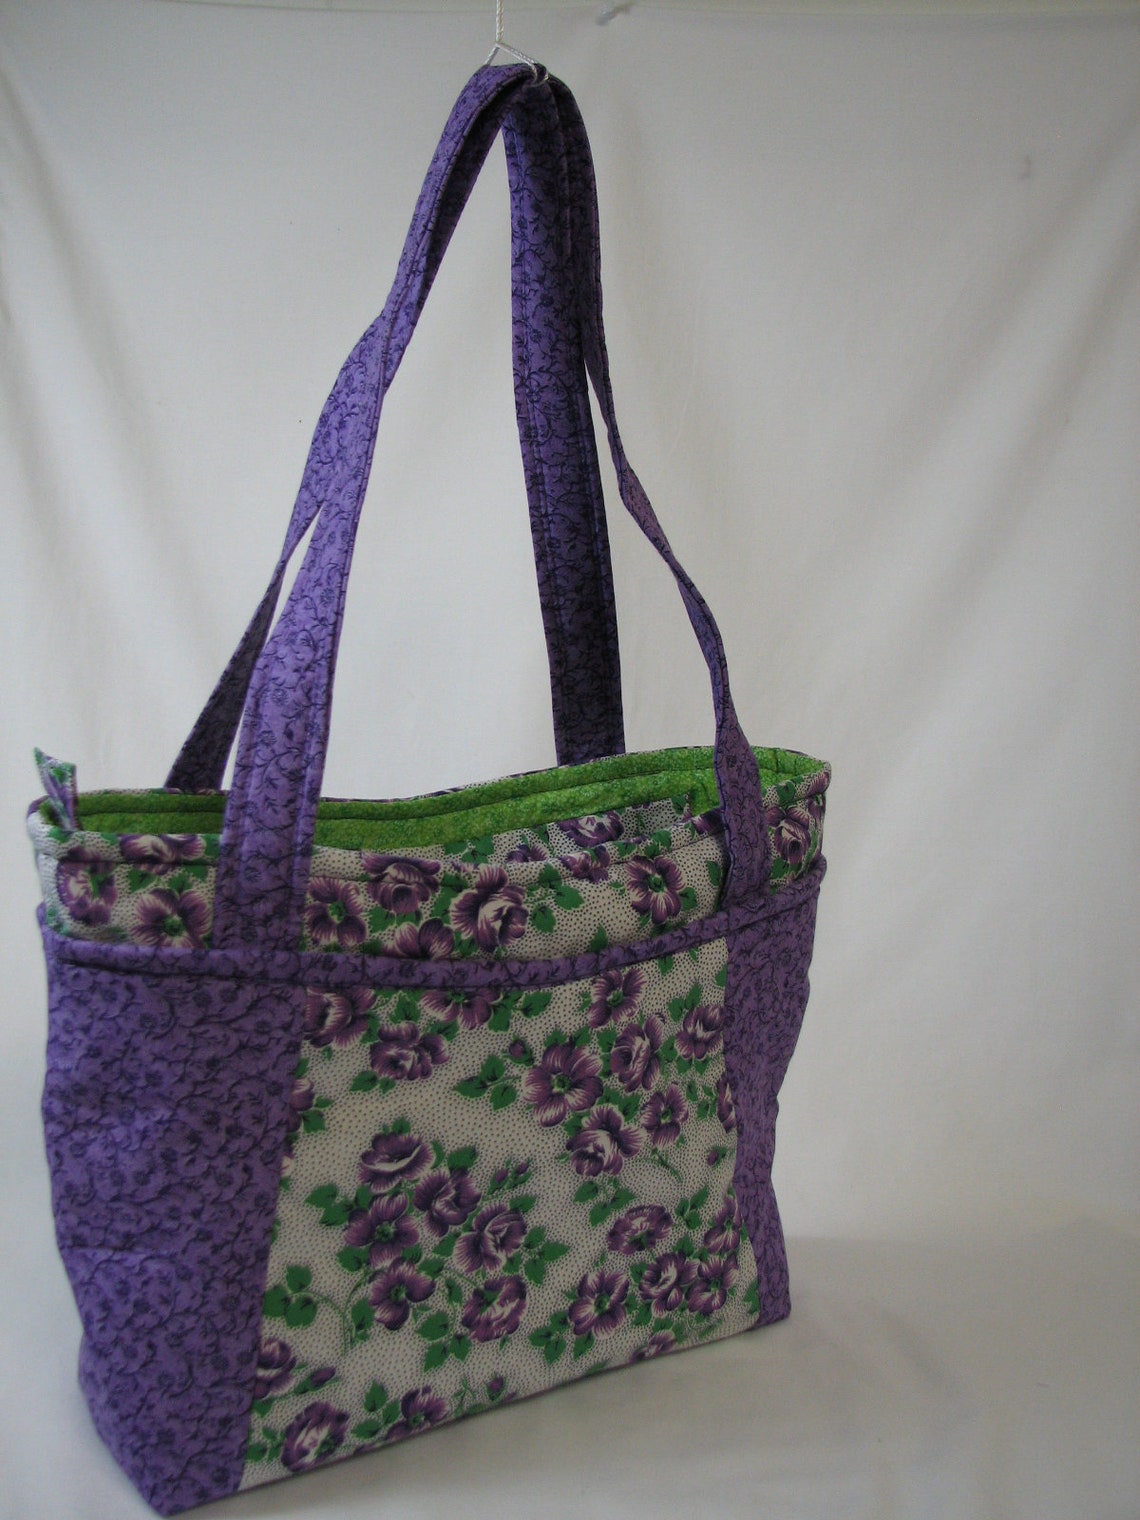 Purple Floral and Green Fabric Handbag Purse Tote Bag With | Etsy